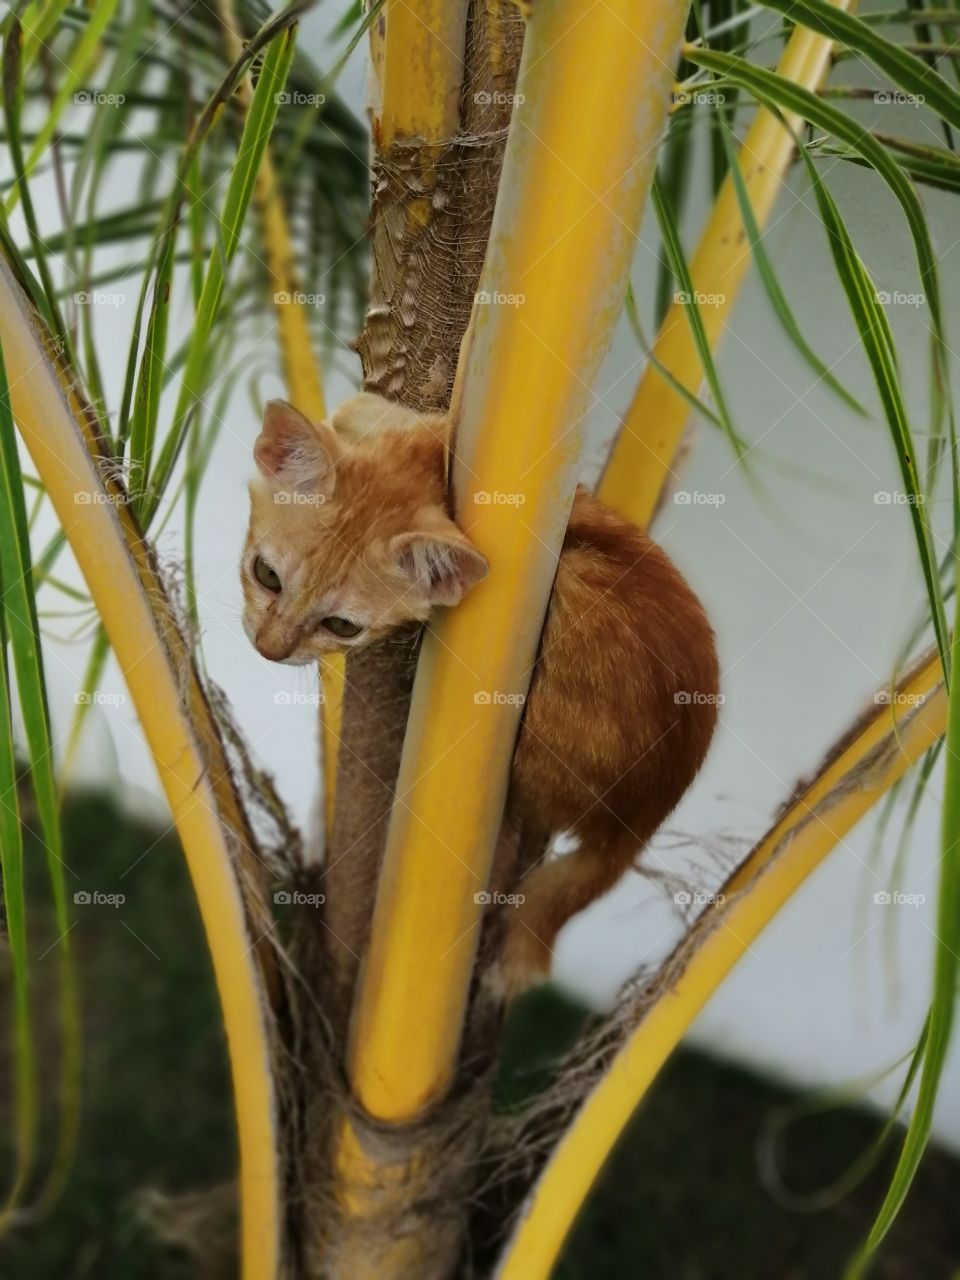 My little cat is climbing alone of the young coconut plant. She's playing and climbing up and down.
She so nice.